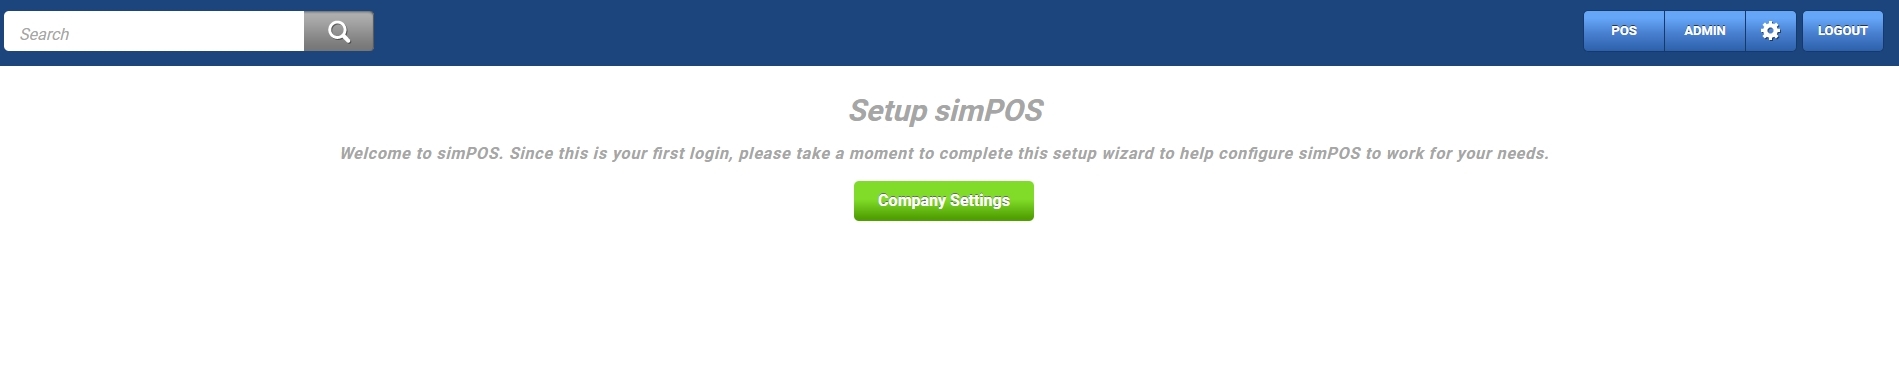 A screenshot of simPOS logging in for the first time.